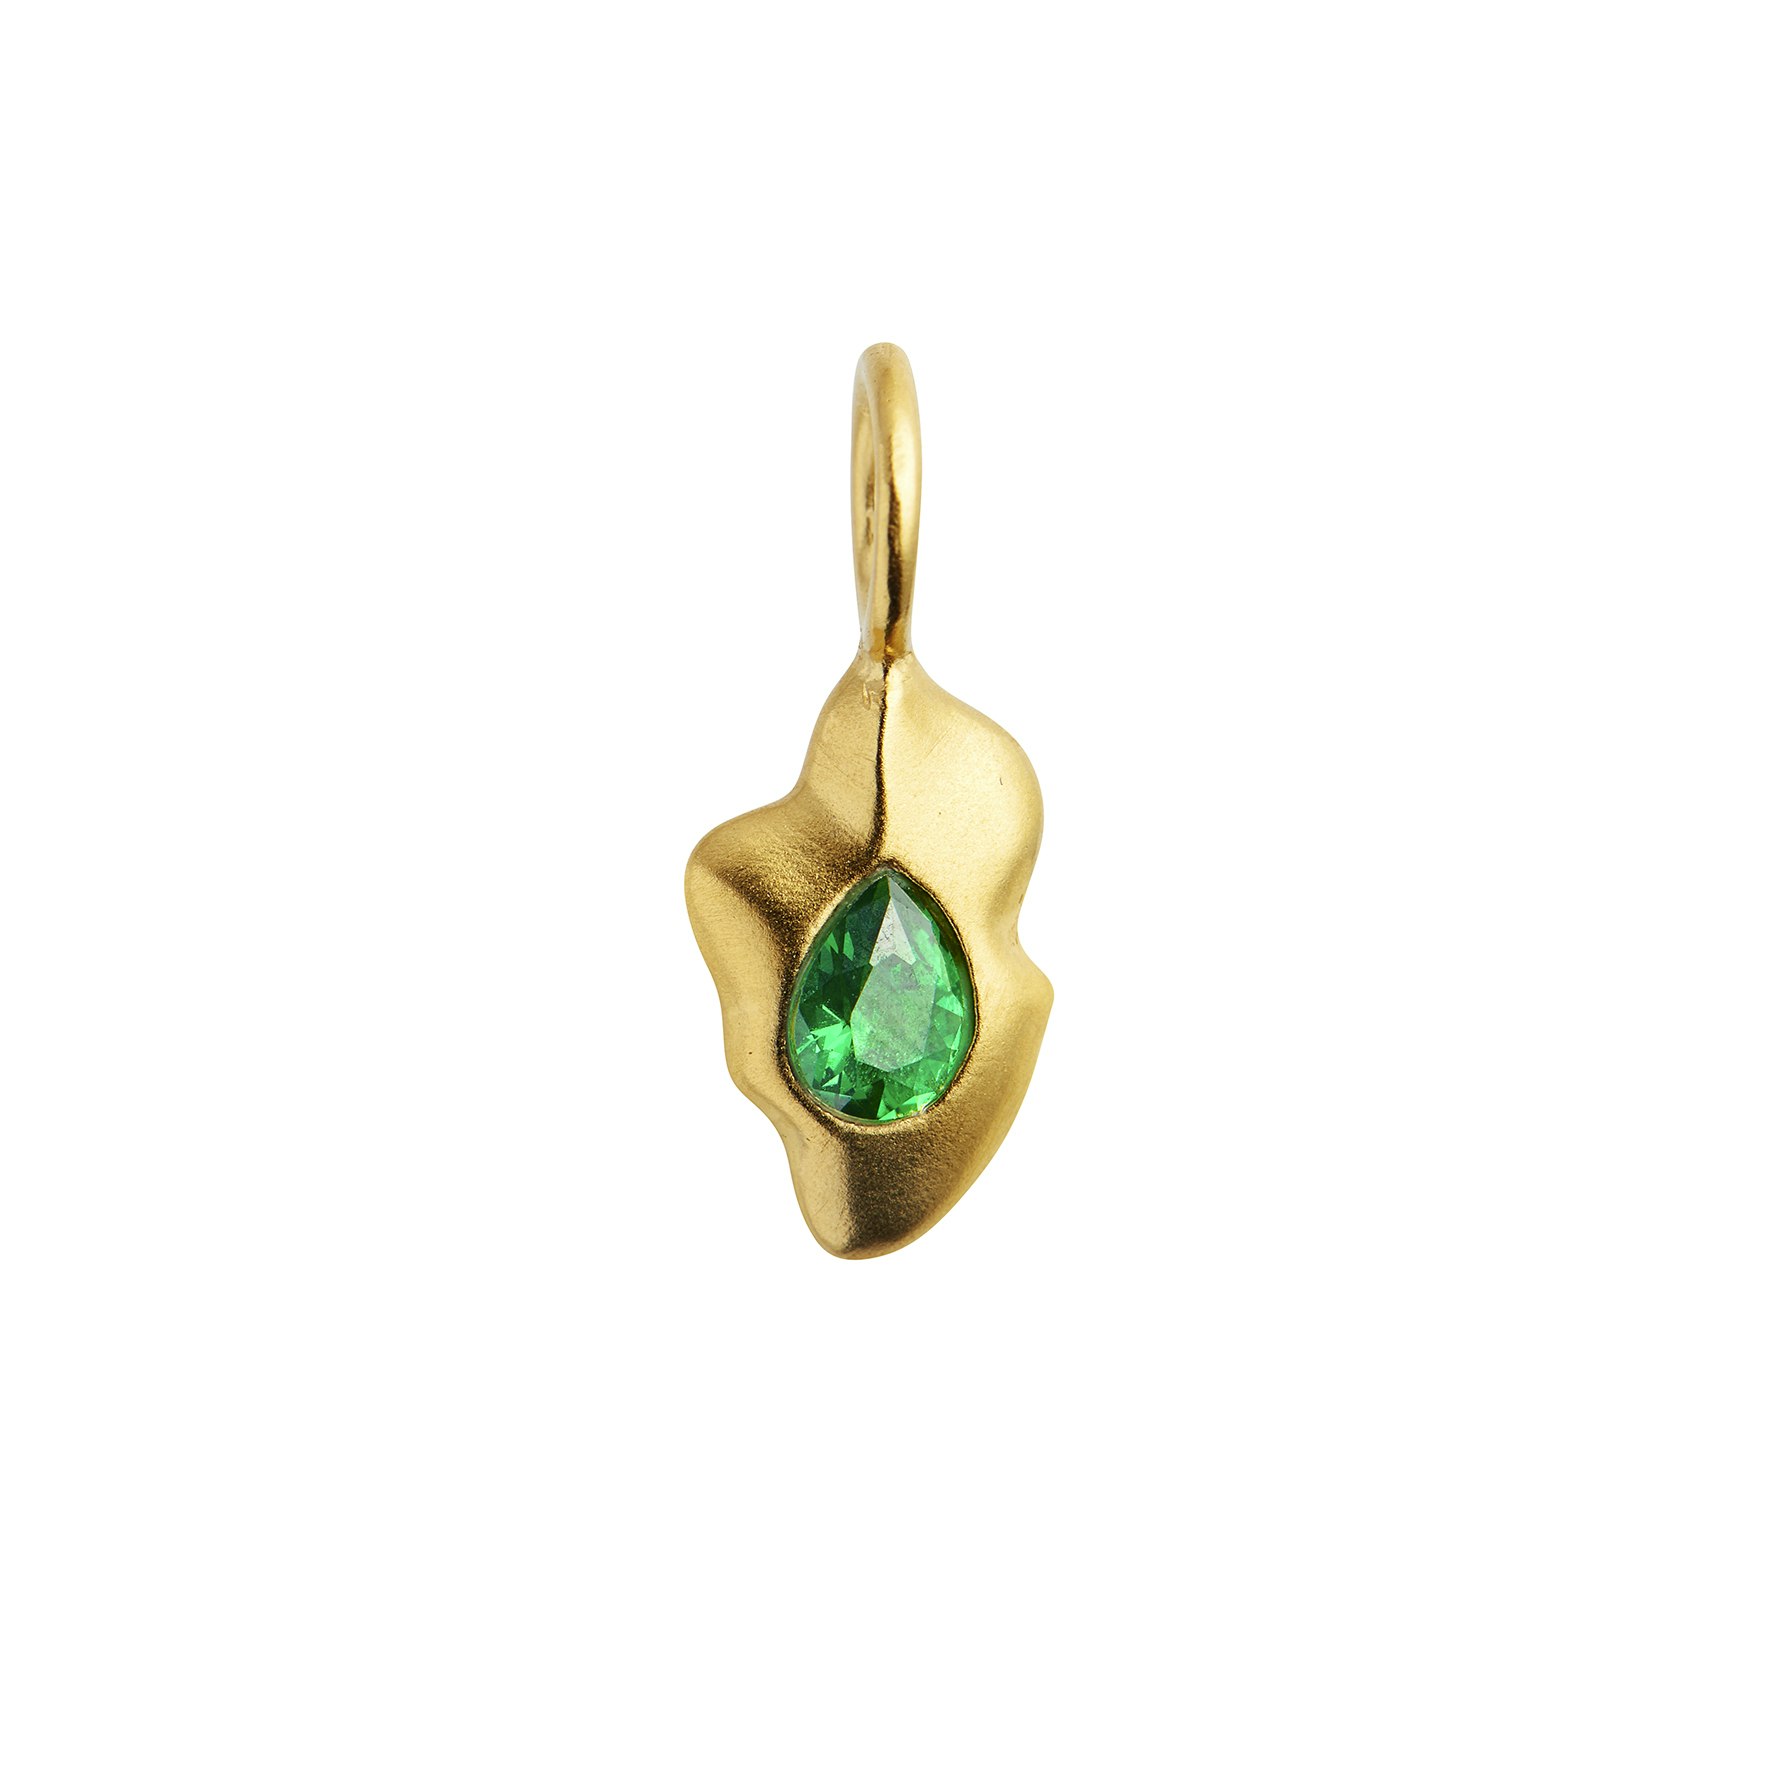 Glimpse Pendant With Green Stone from STINE A Jewelry in Goldplated-Silver Sterling 925